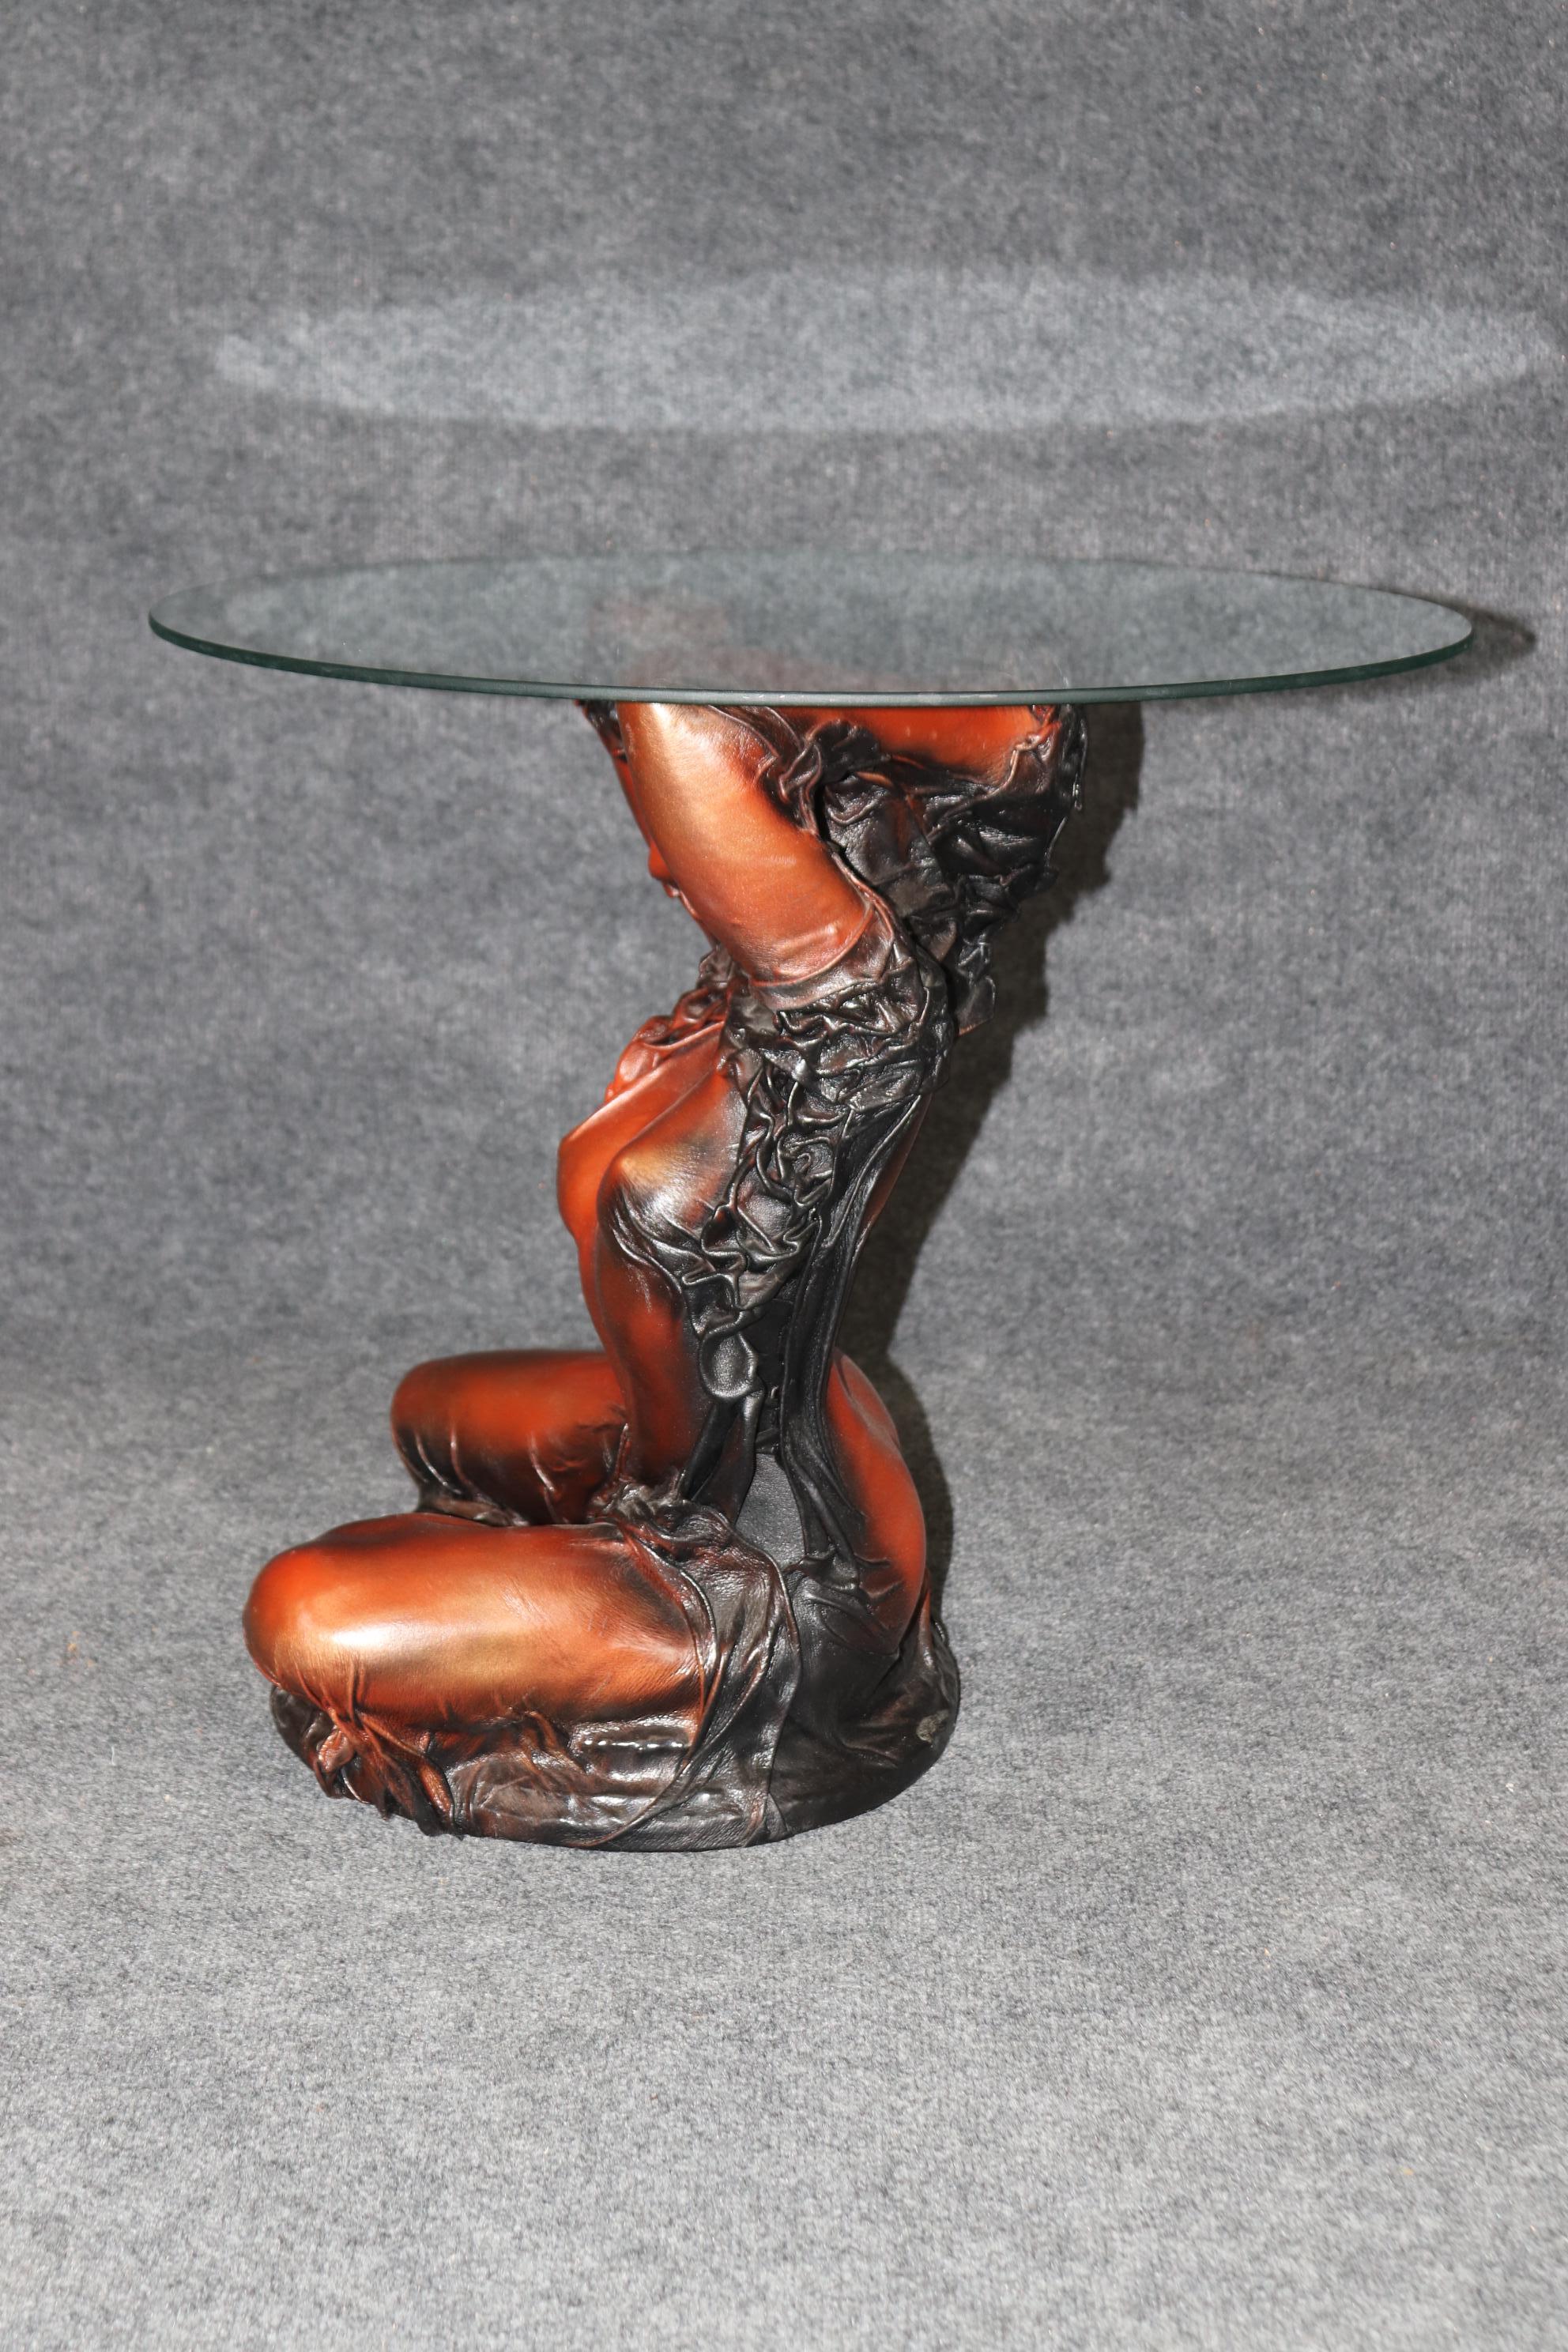 Dimensions - H: 24in W: 23 3/4in D: 23 3/4in 

This Mid Century Modern Leather Glass Top End Table Attr to Daphne Du Barry is a very unique and interesting piece! IF you look at the photos provided you will see the attention to detail within the